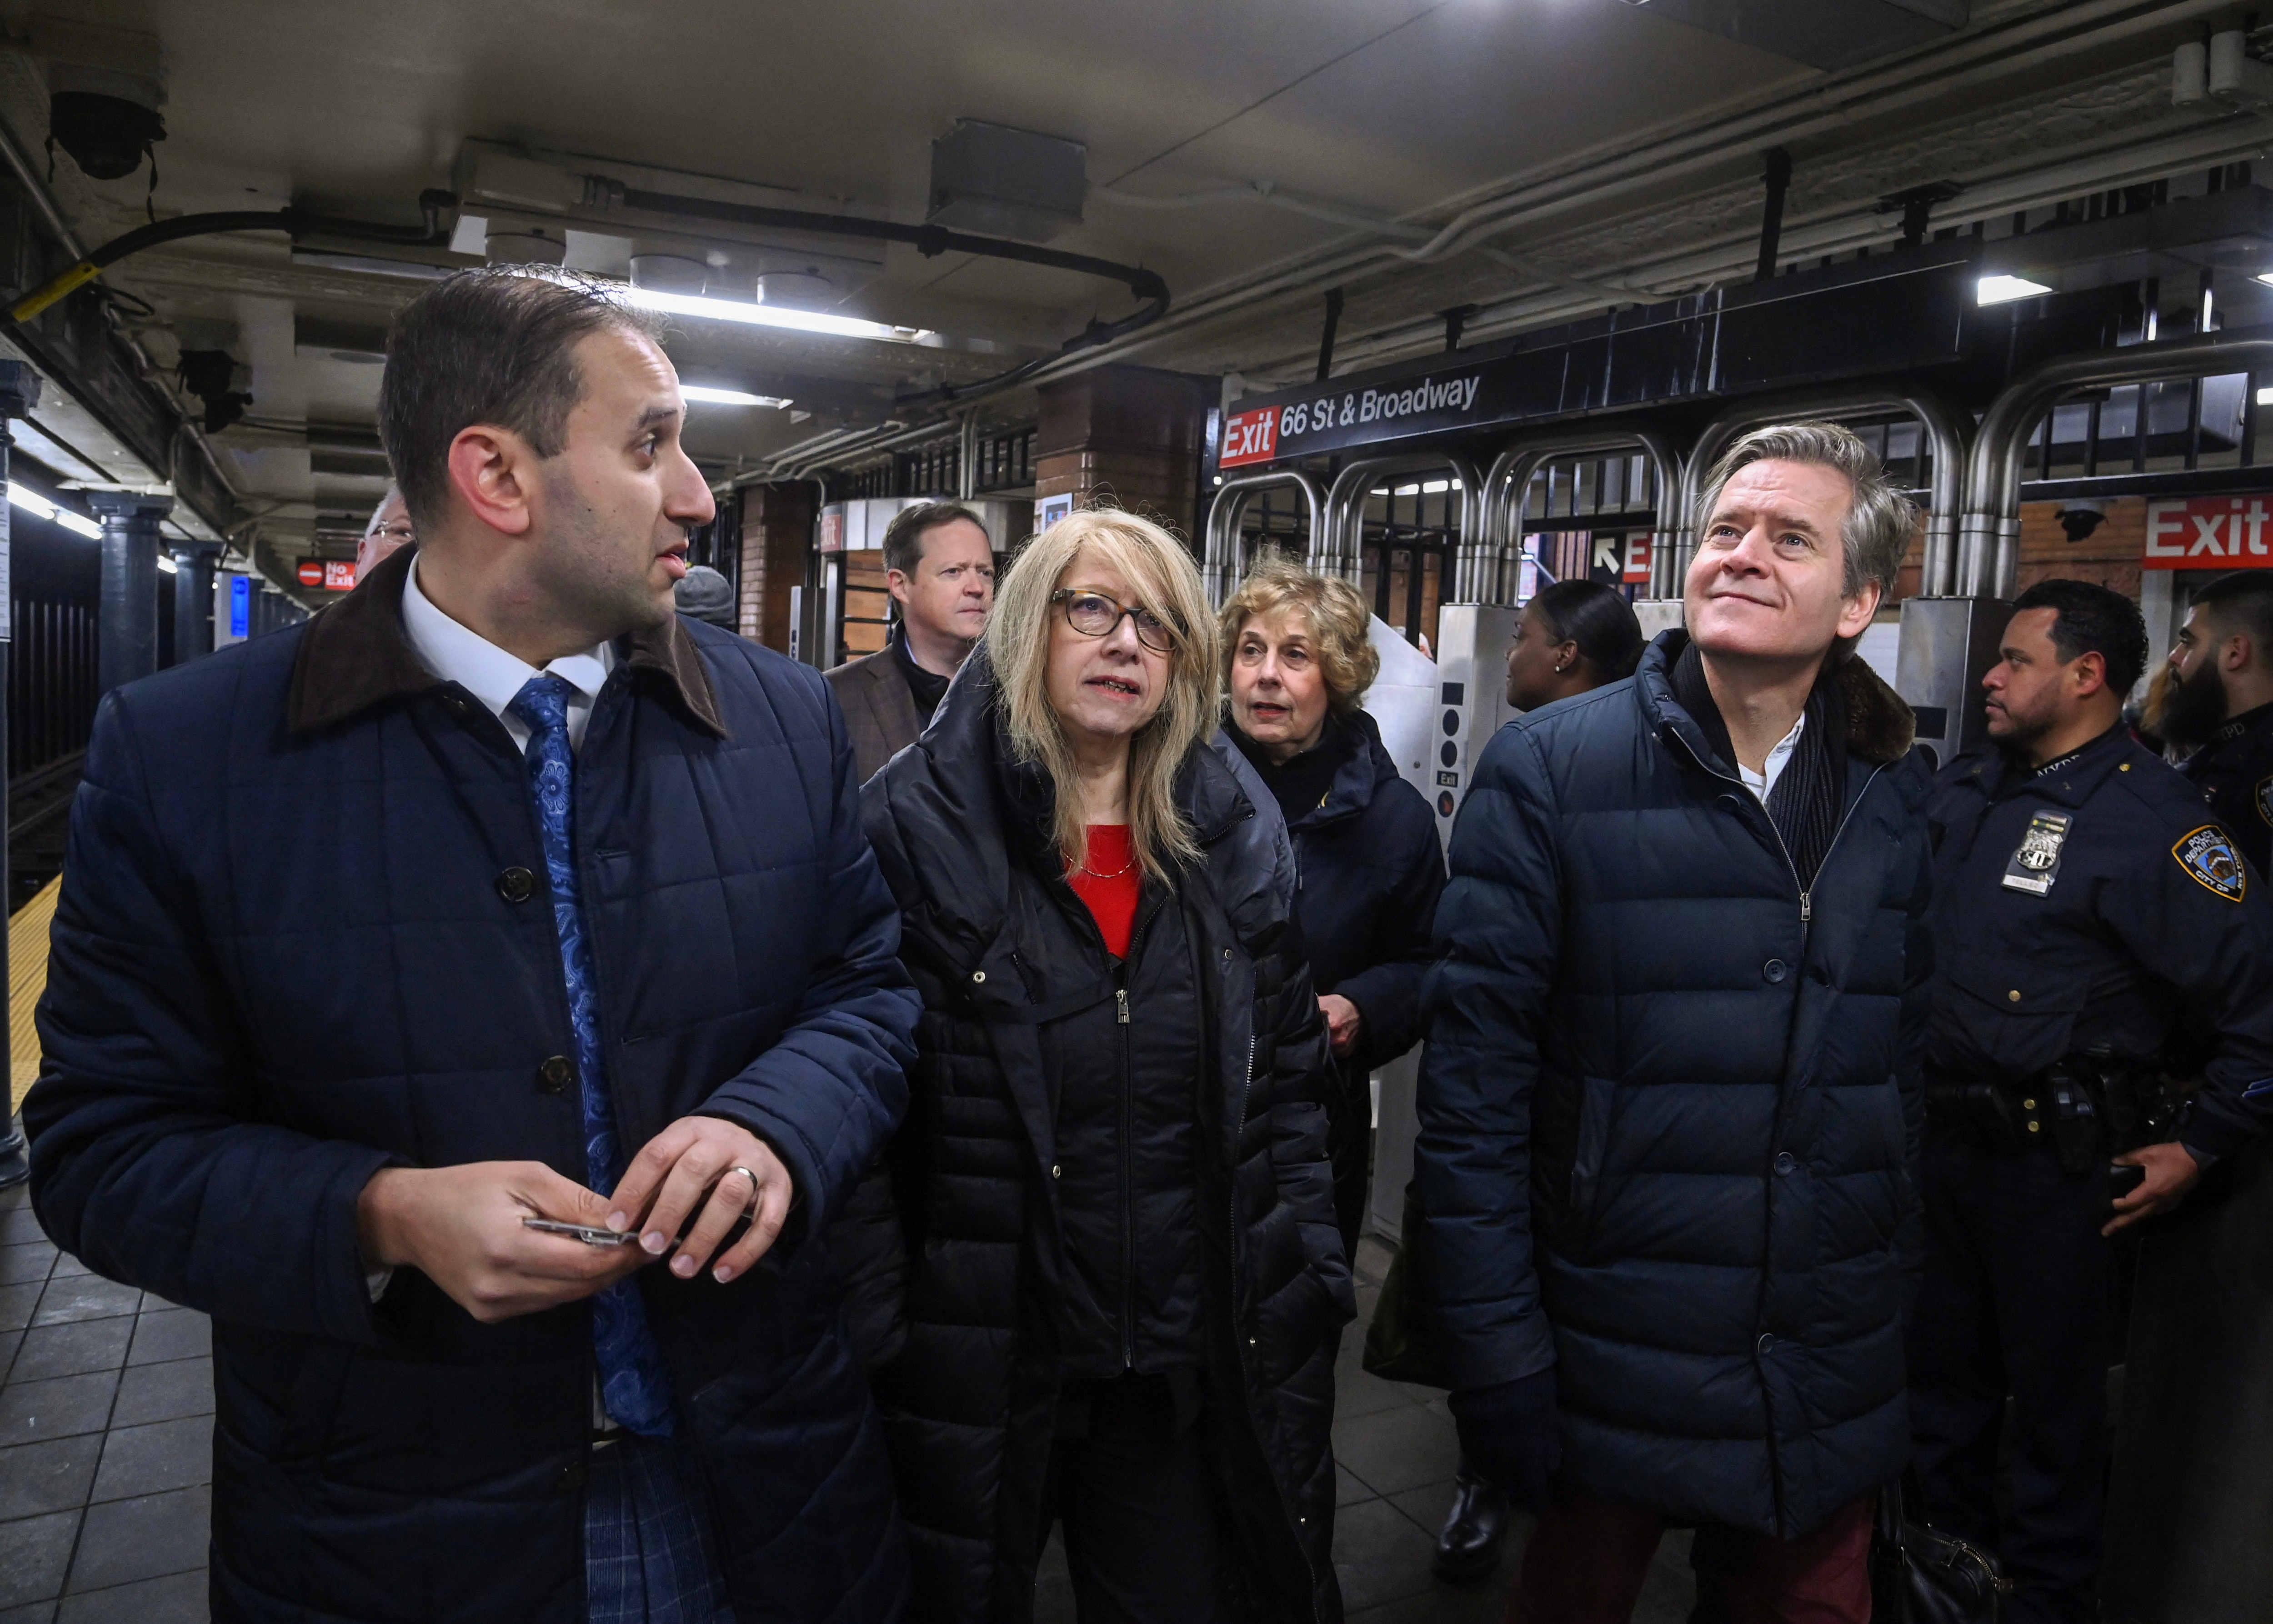 Elected Officials receive tour of reNEWvated 66 St - Lincoln Center Station